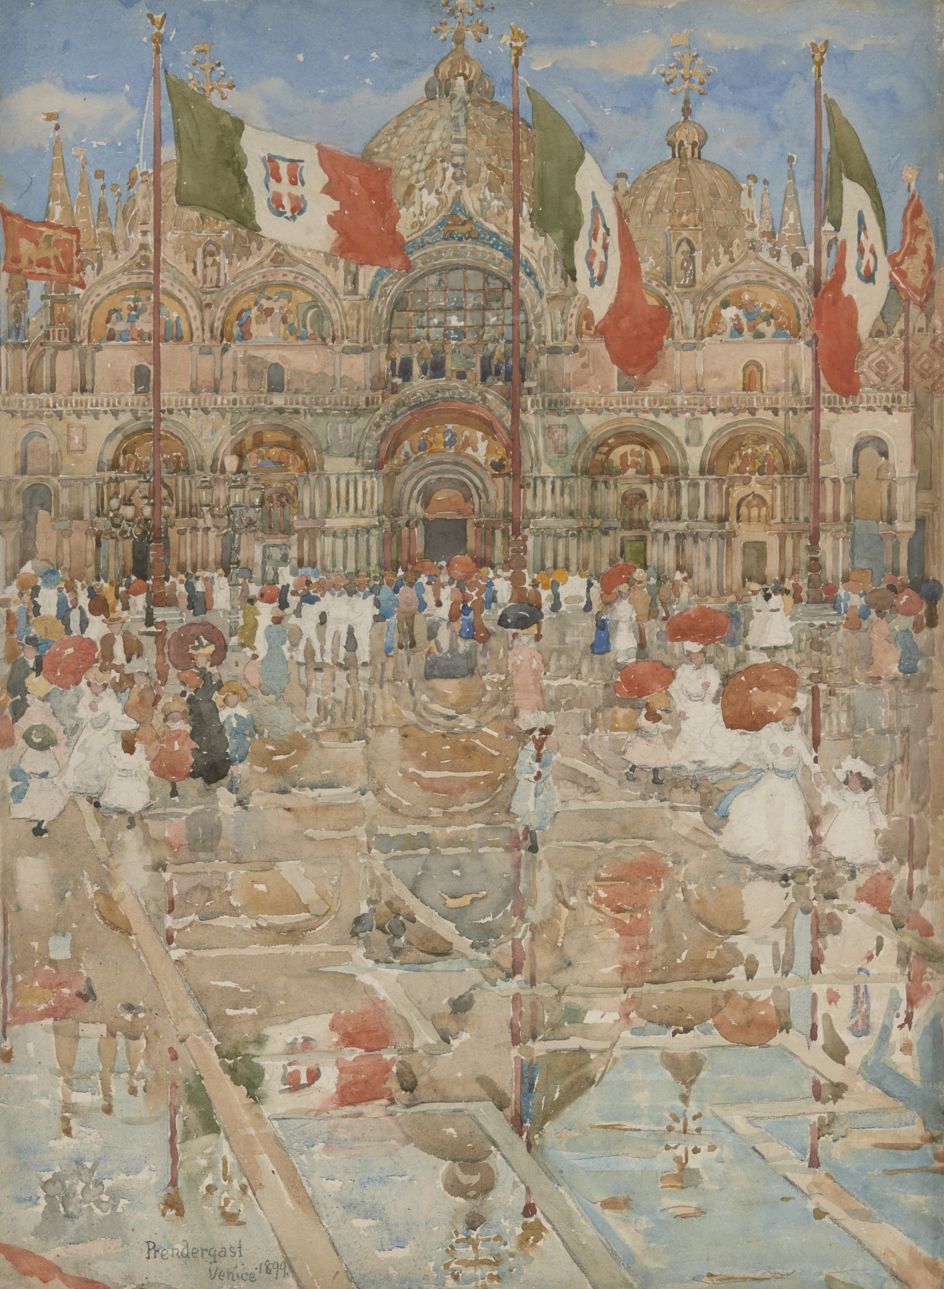 Splash of Sunshine and Rain (Piazza San Marco, Venice), 1899. Maurice B. Prendergast, American, 1858-1924. Watercolor and graphite on paper, 19 3/8 × 14 1/4 inches Private collection.